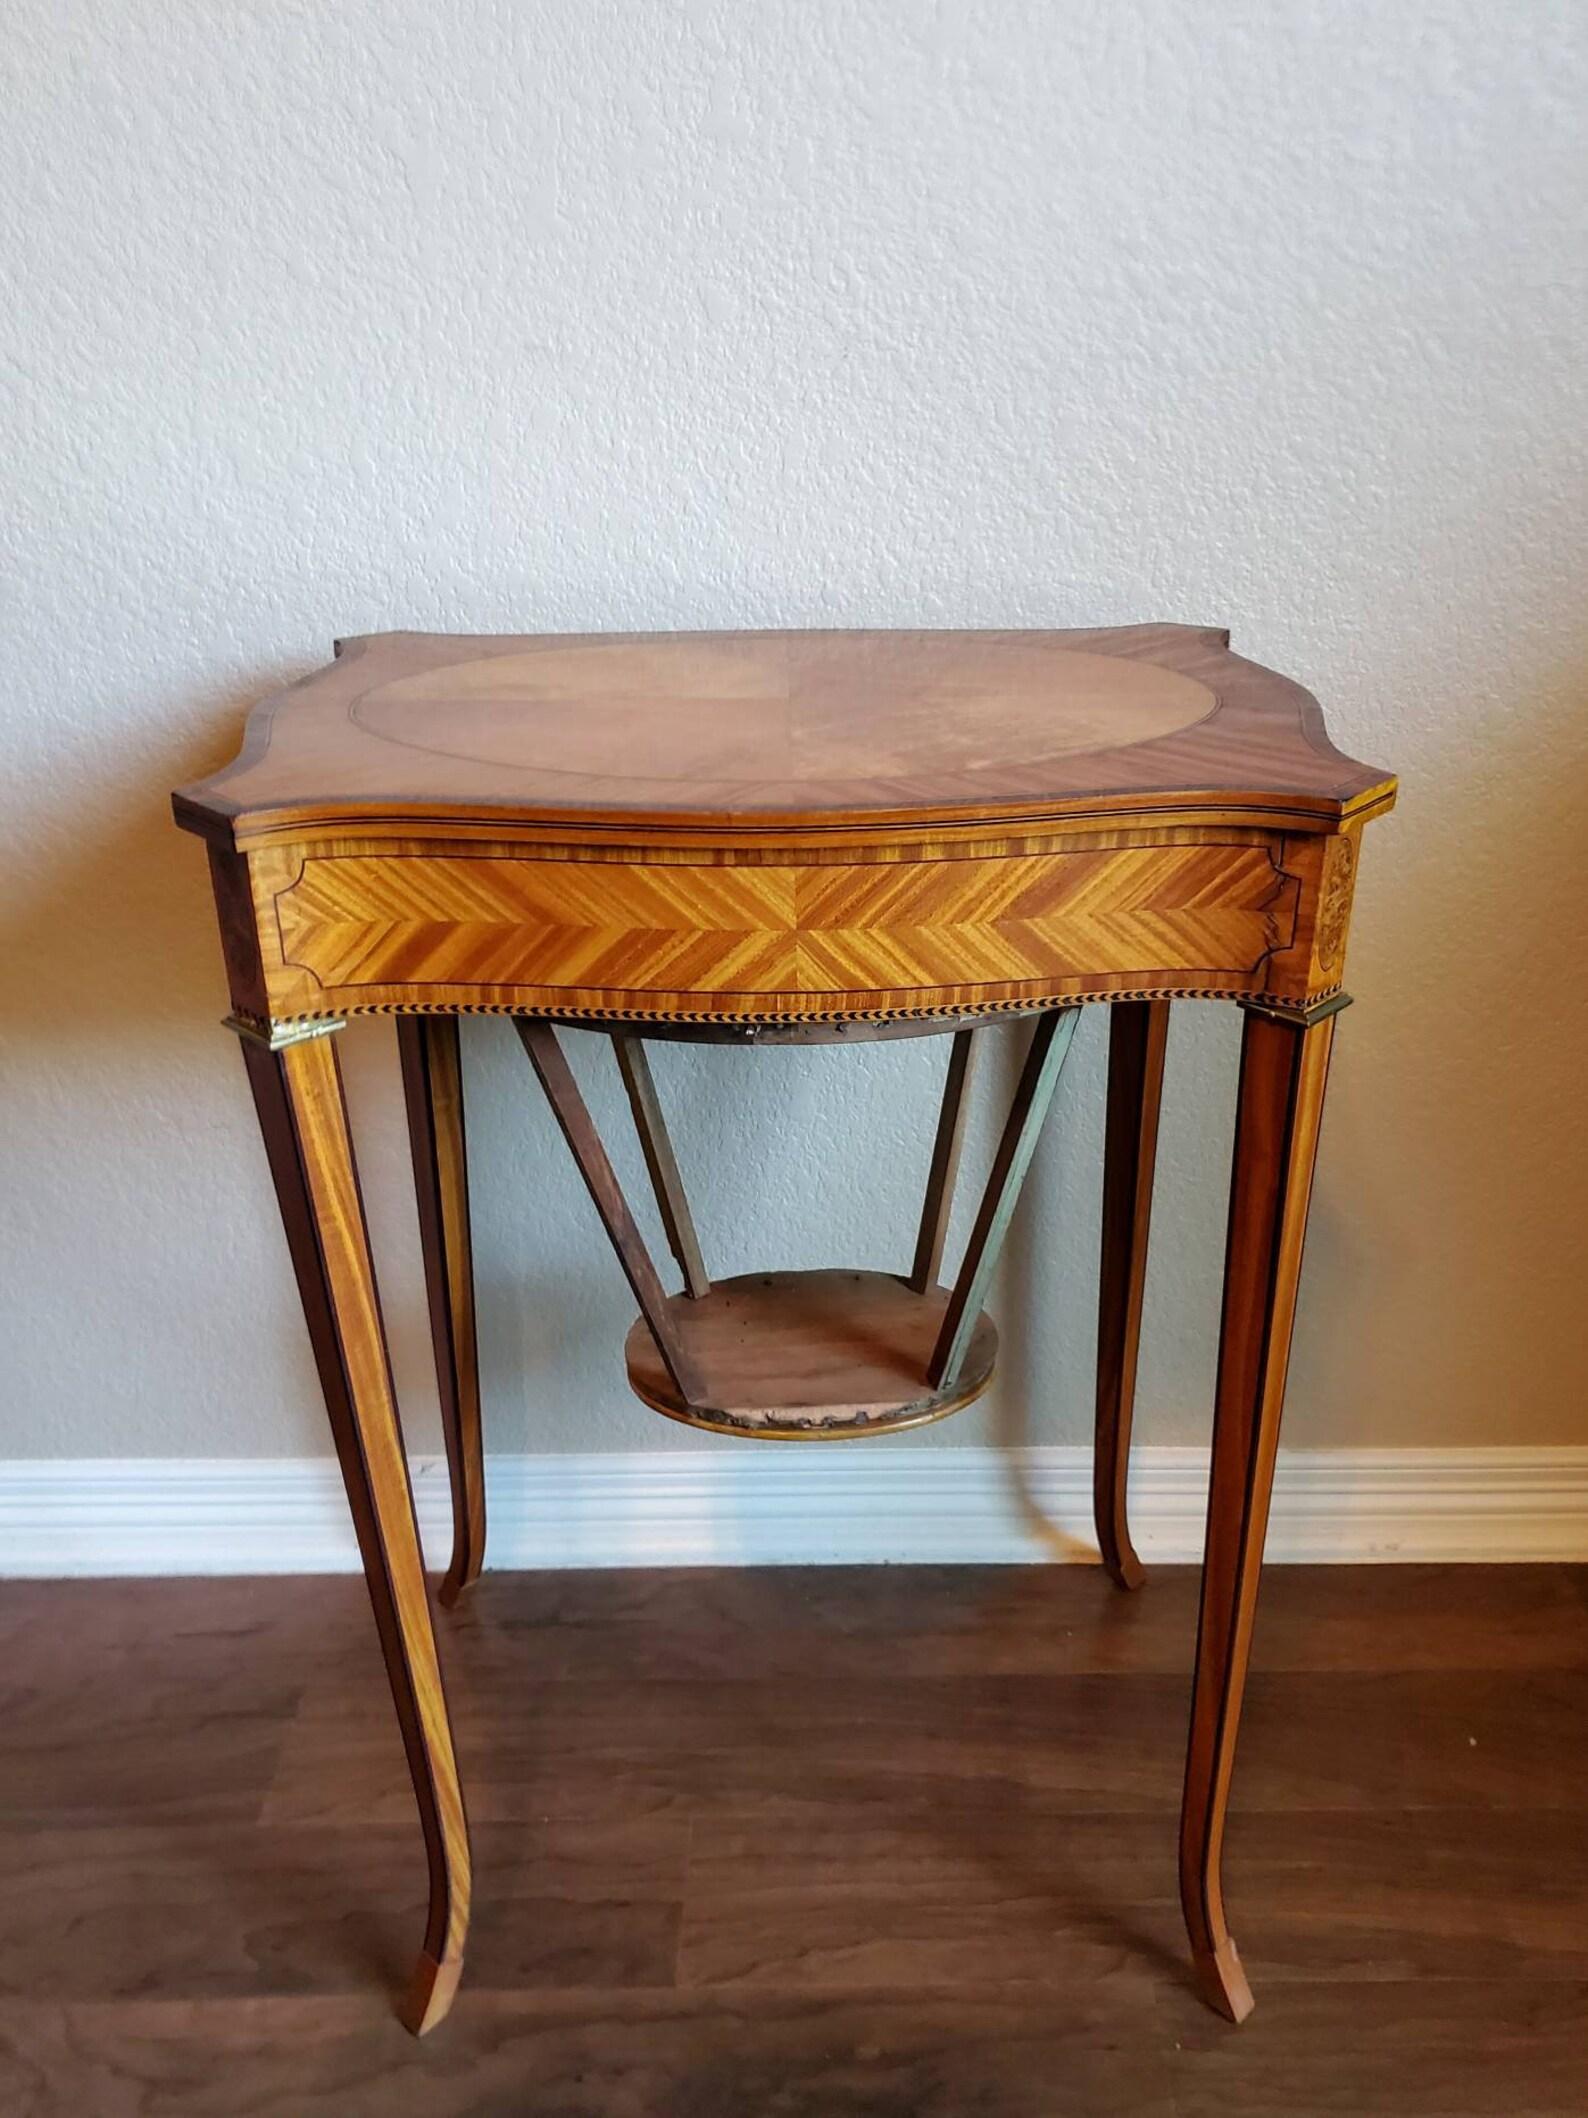 Antique English Edwardian Marquetry Inlaid Sewing Table For Sale 2